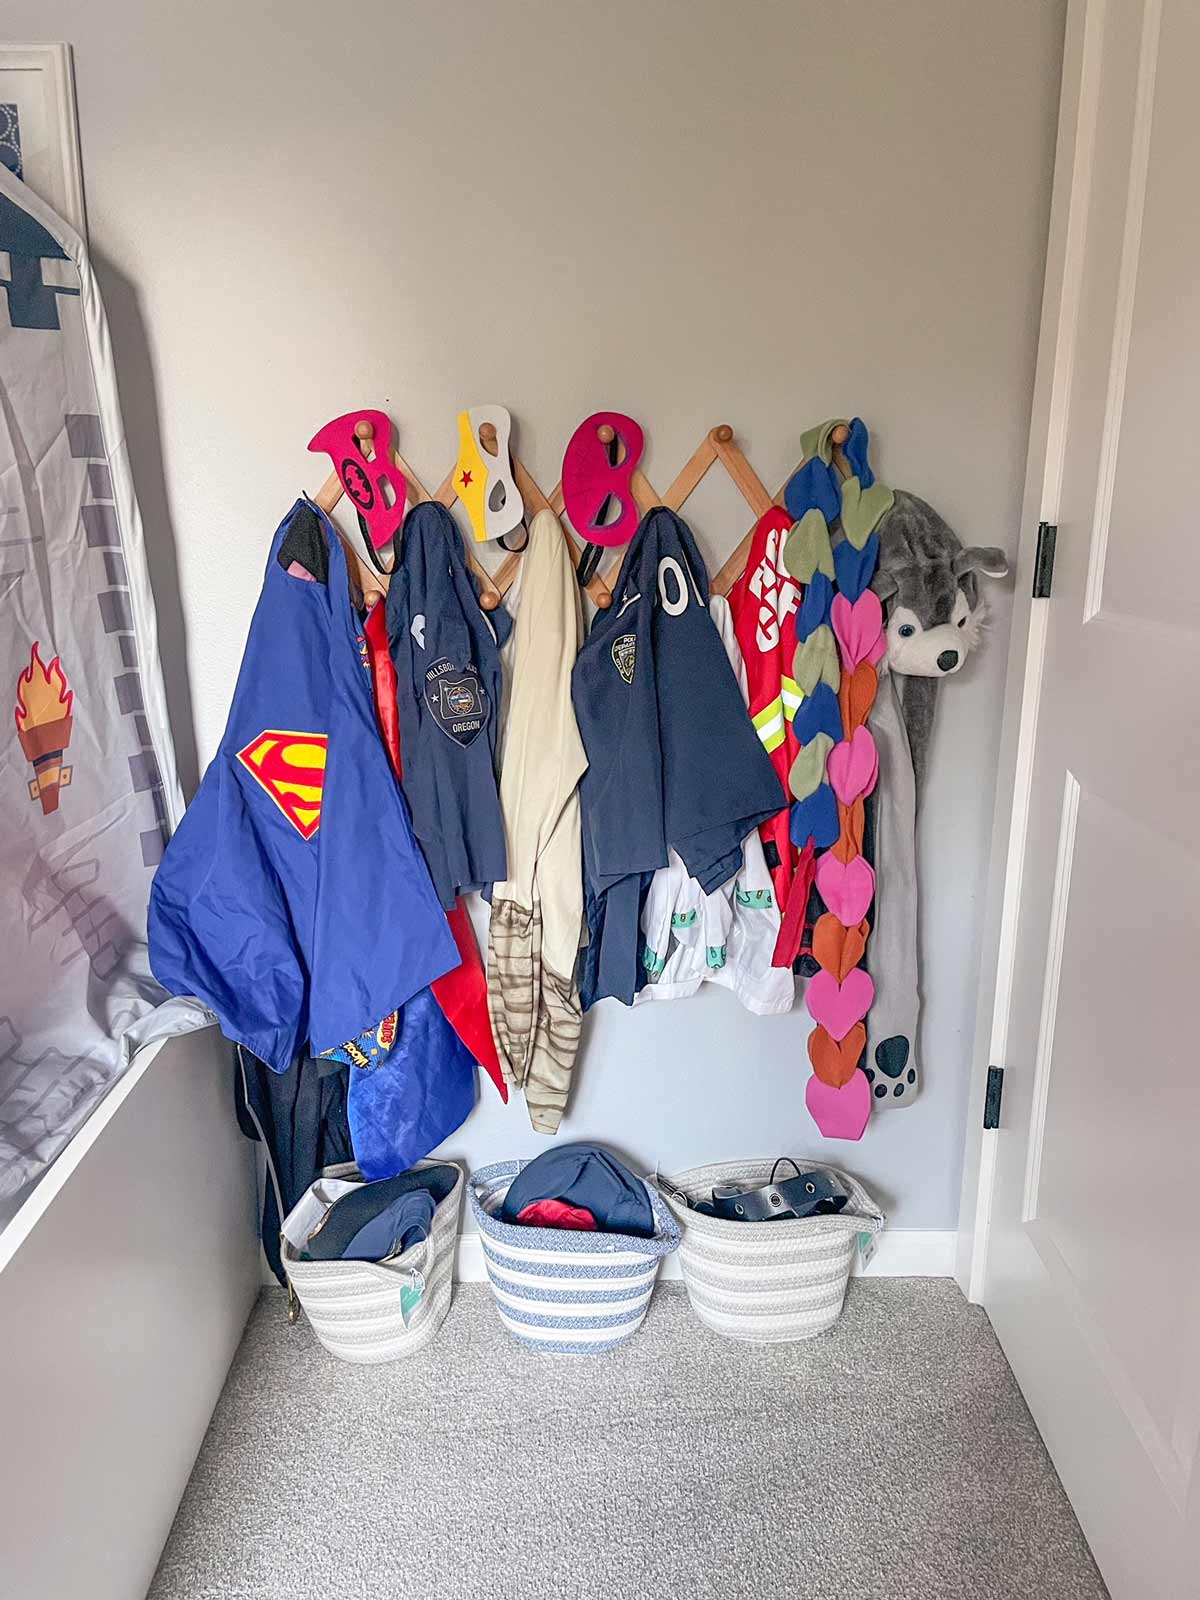 Dress up clothing in a child's bedroom organized on a coat rack